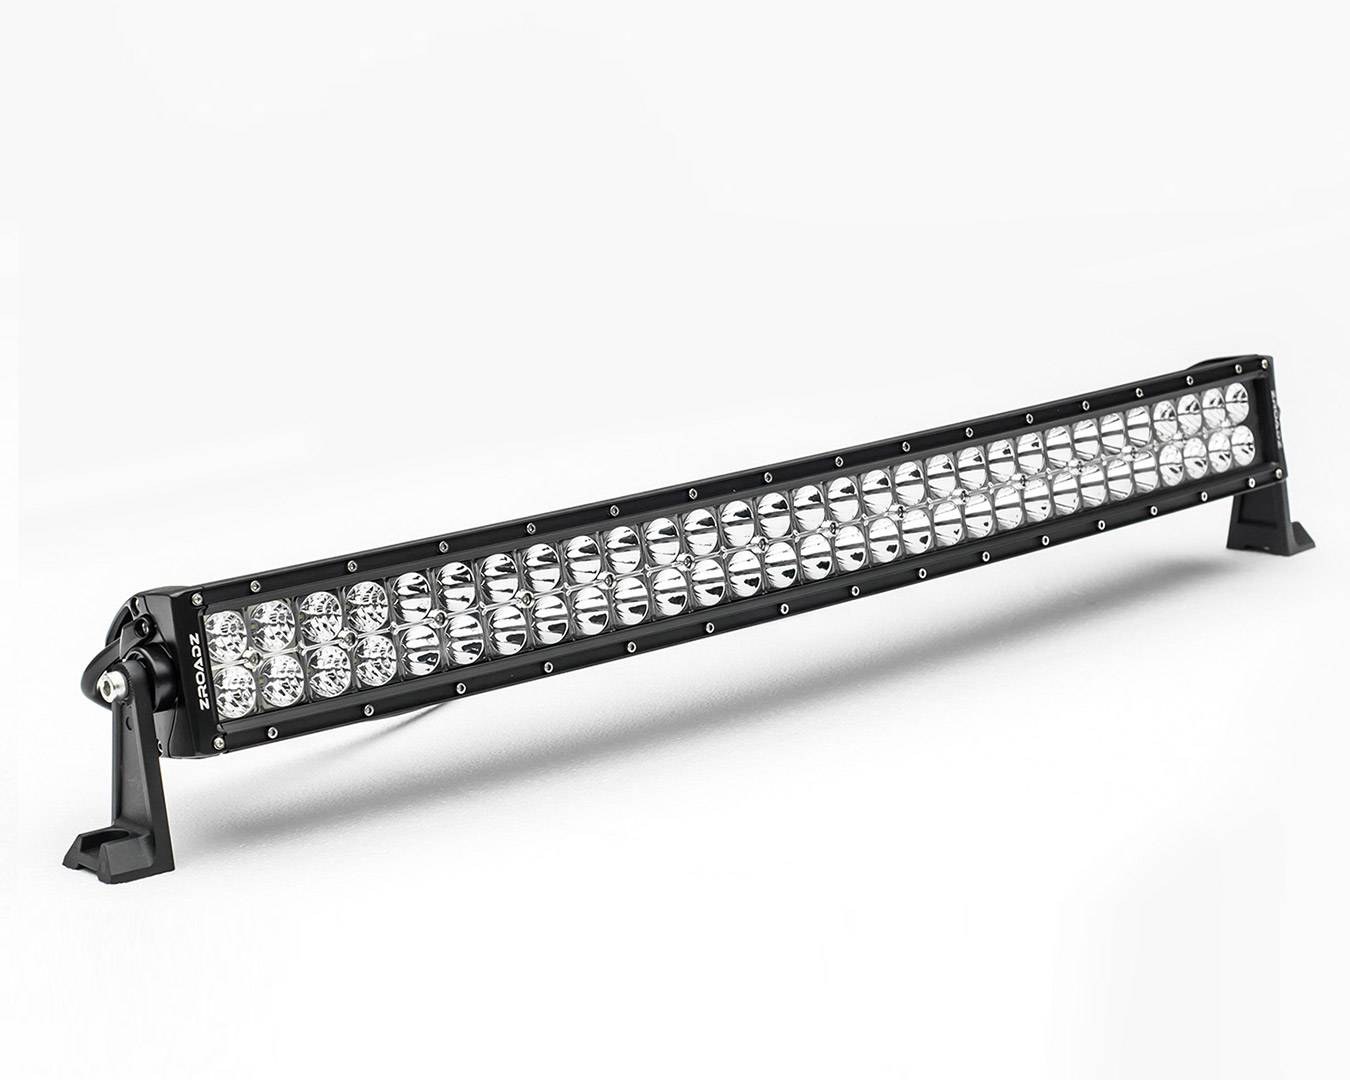 ZROADZ OFF ROAD PRODUCTS - 30 Inch LED Curved Double Row Light Bar - Part # Z30CBC14W180